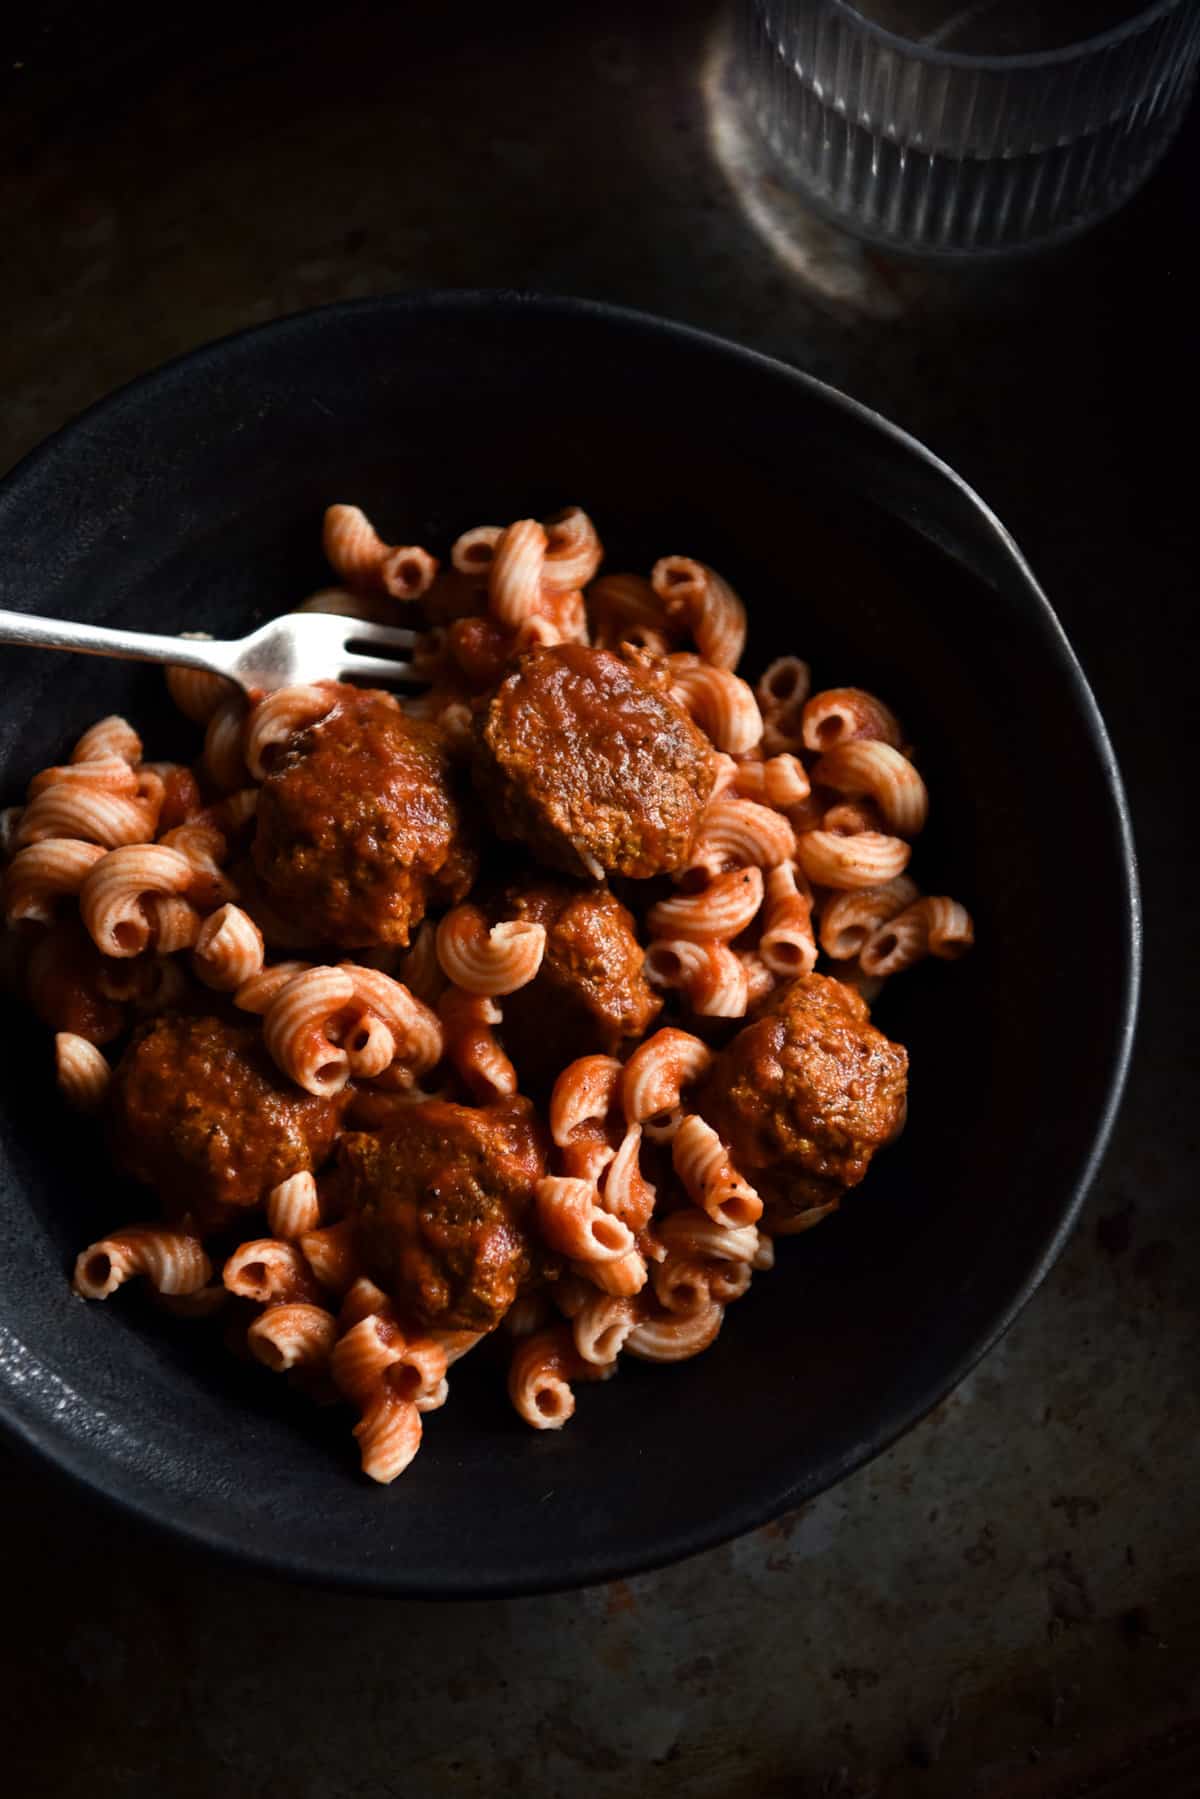 A moody aerial image of a dark ceramic bowl filled with low FODMAP vegan meatballs and pasta. A fork sticks into the bowl from the left hand side and the bowl sits atop a dark steel backdrop.